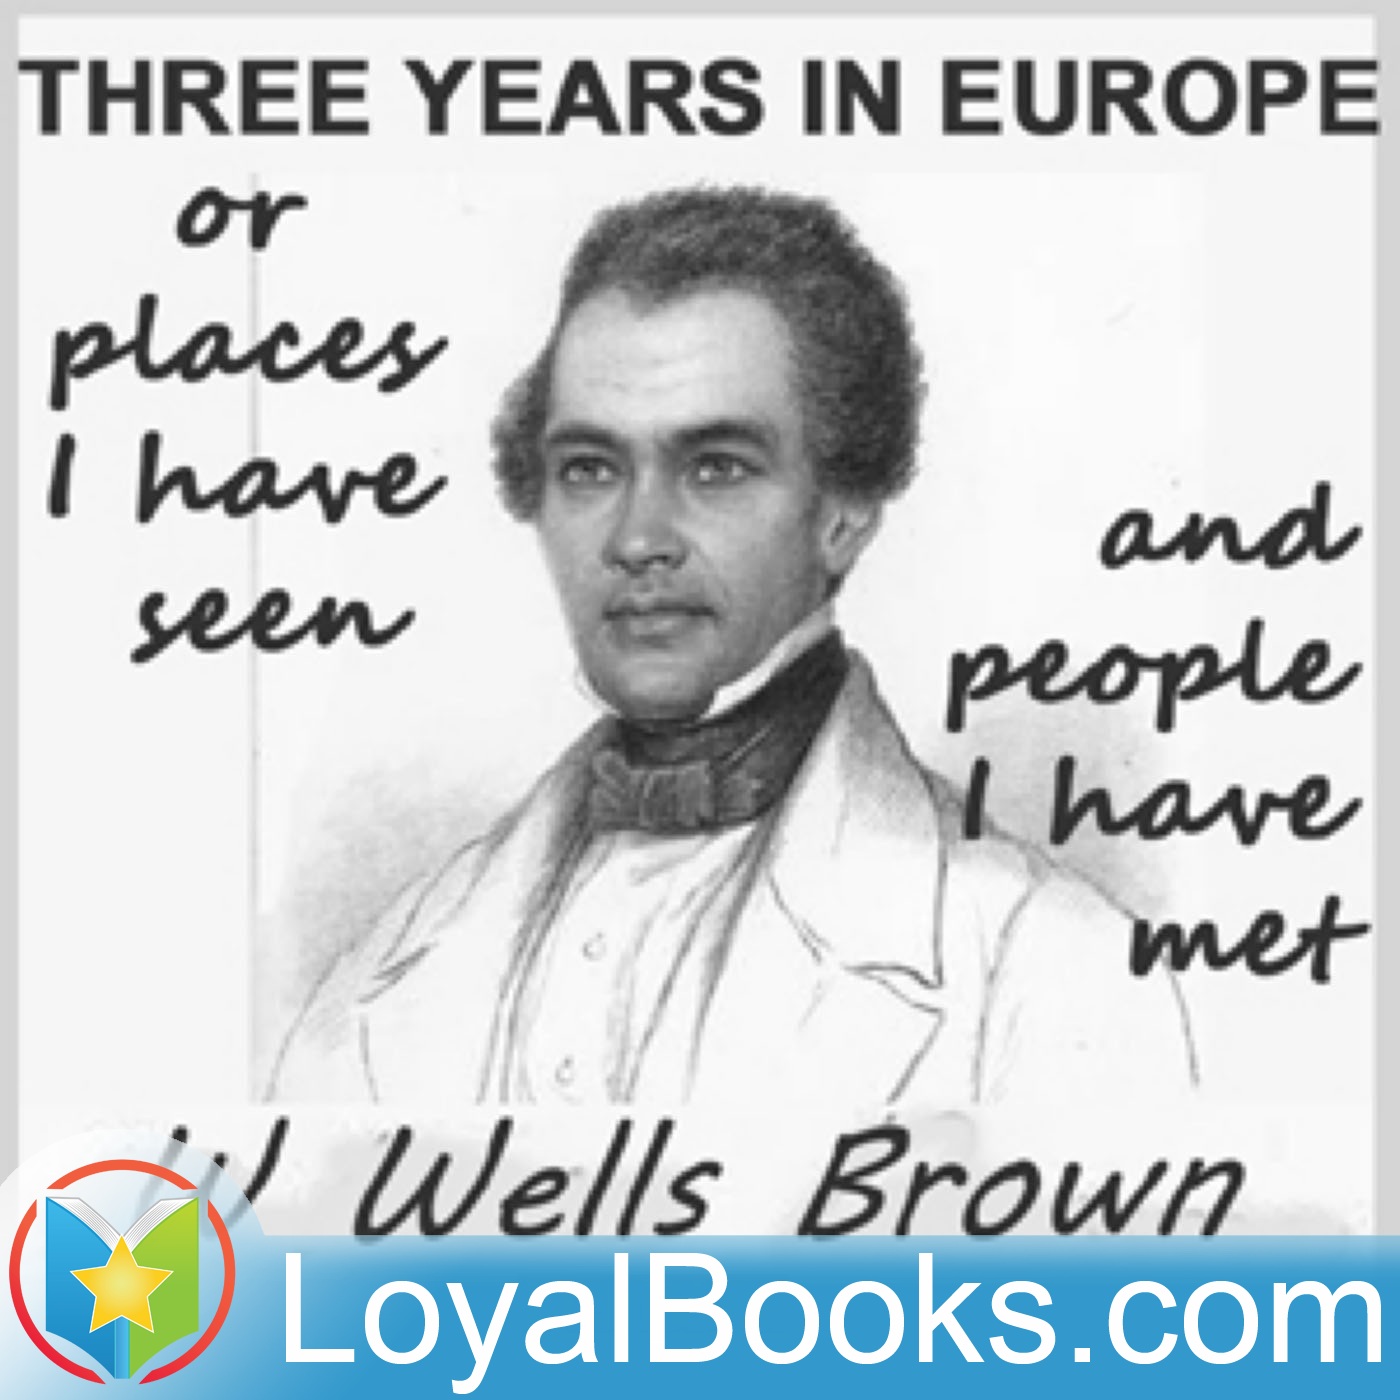 Three Years In Europe by William Wells Brown